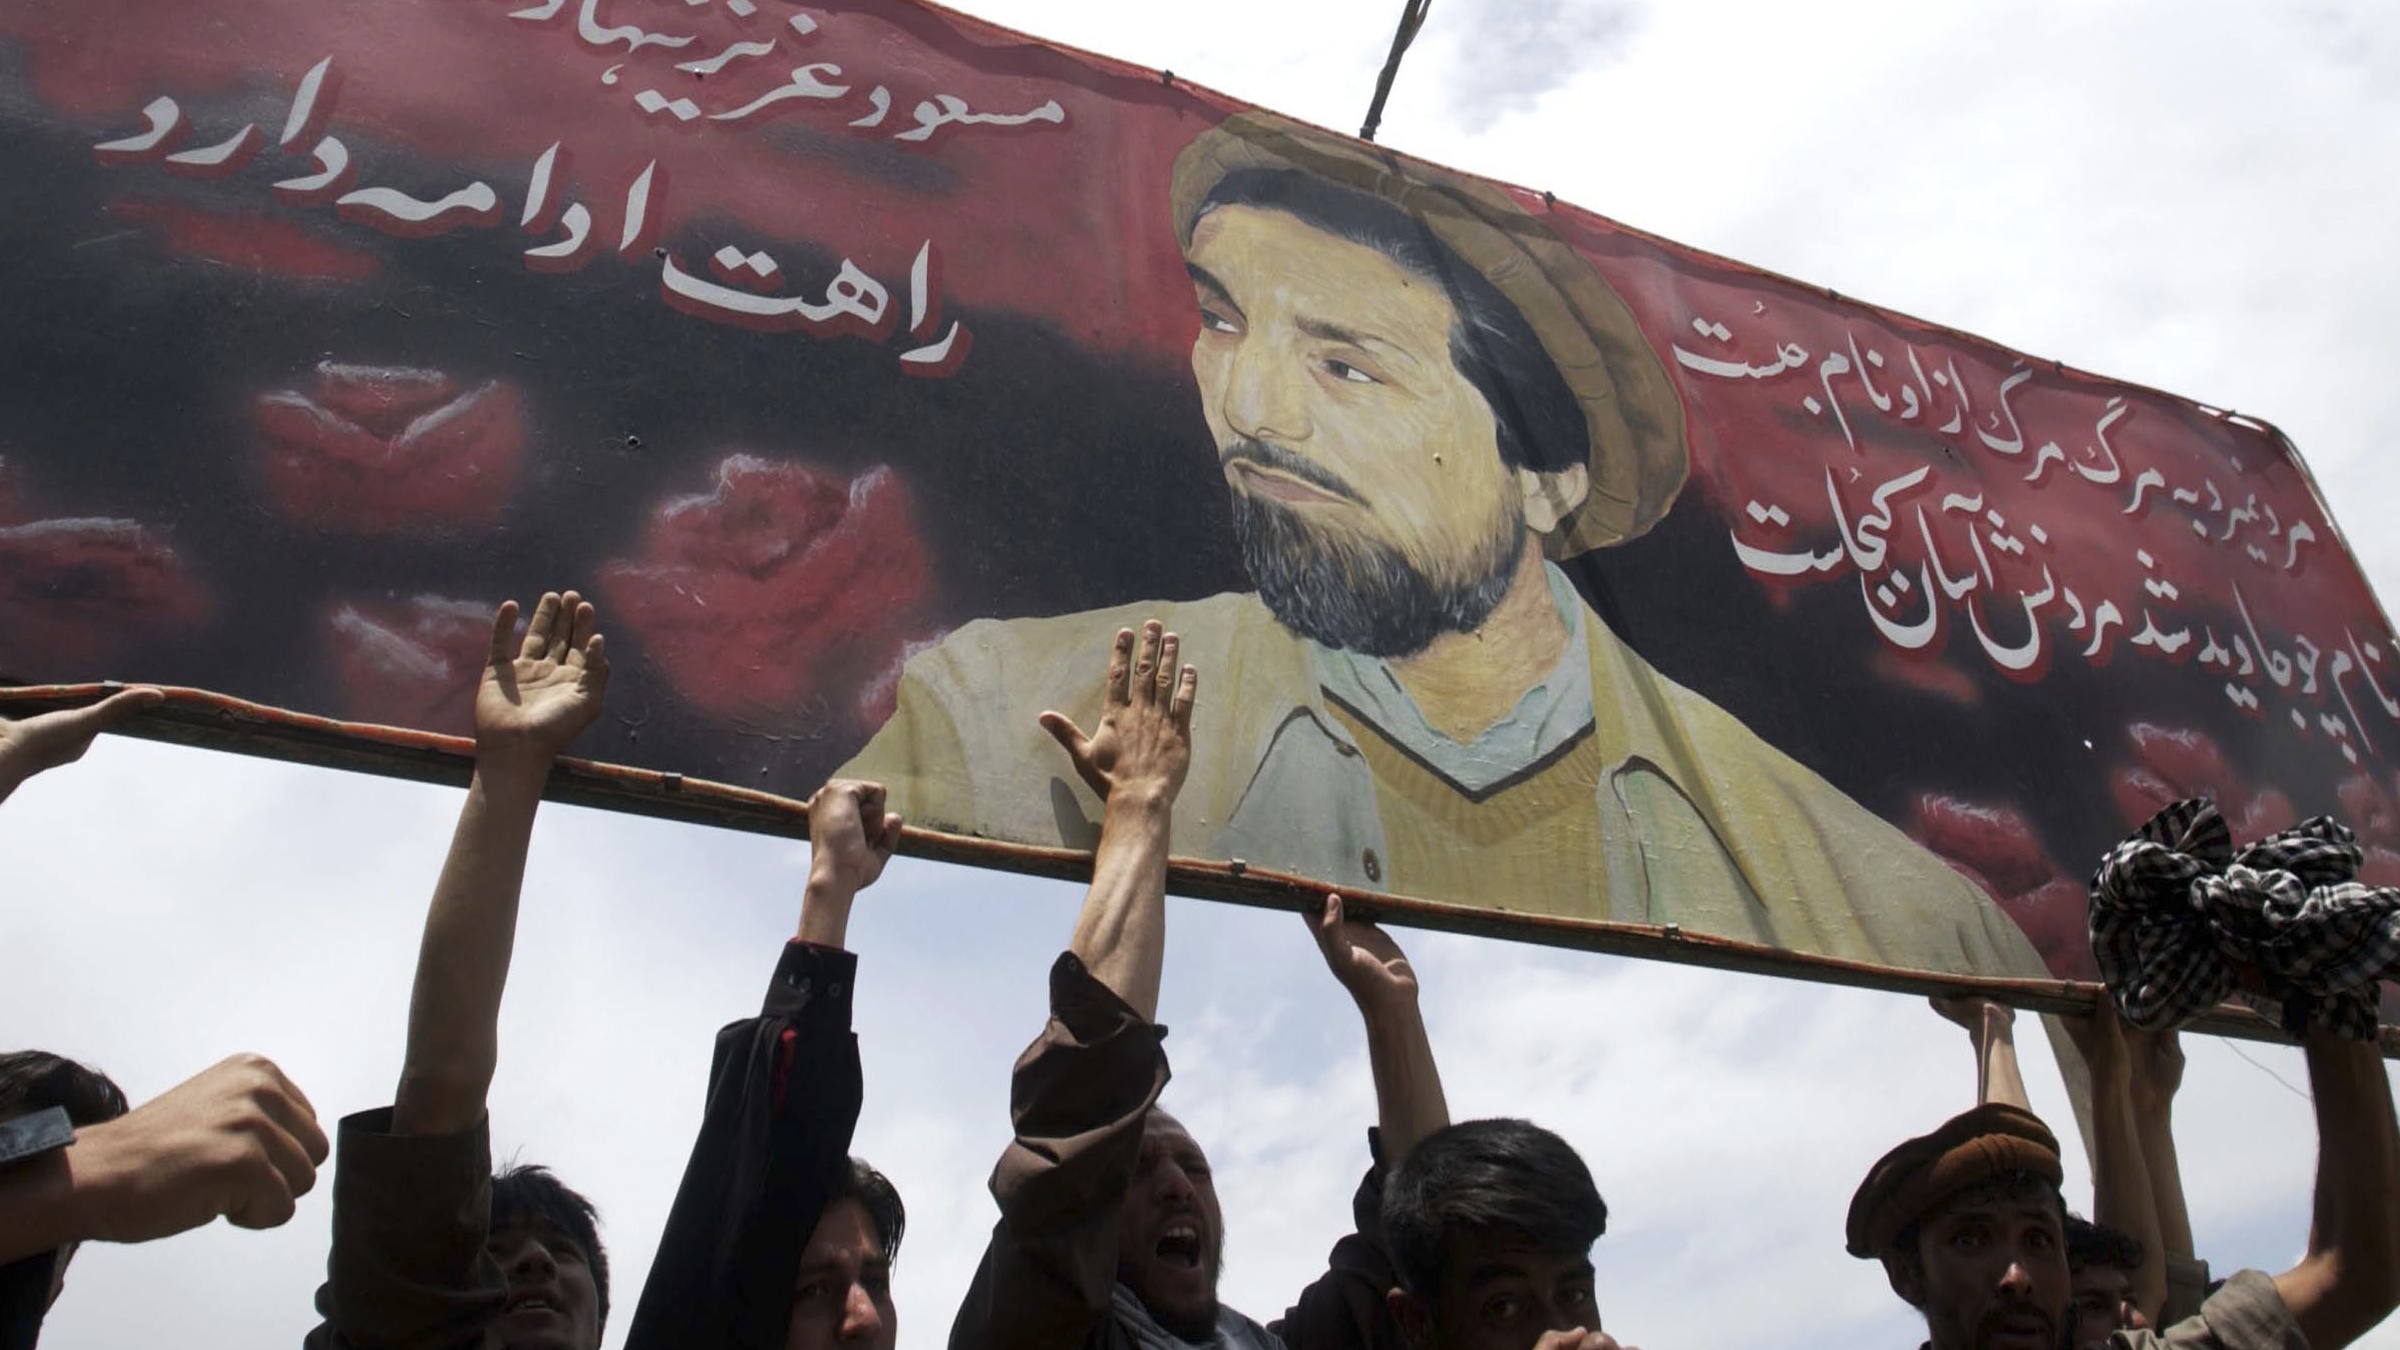 Afghans protest under an image of the late Ahmad Shah Massoud in Kabul in 2003